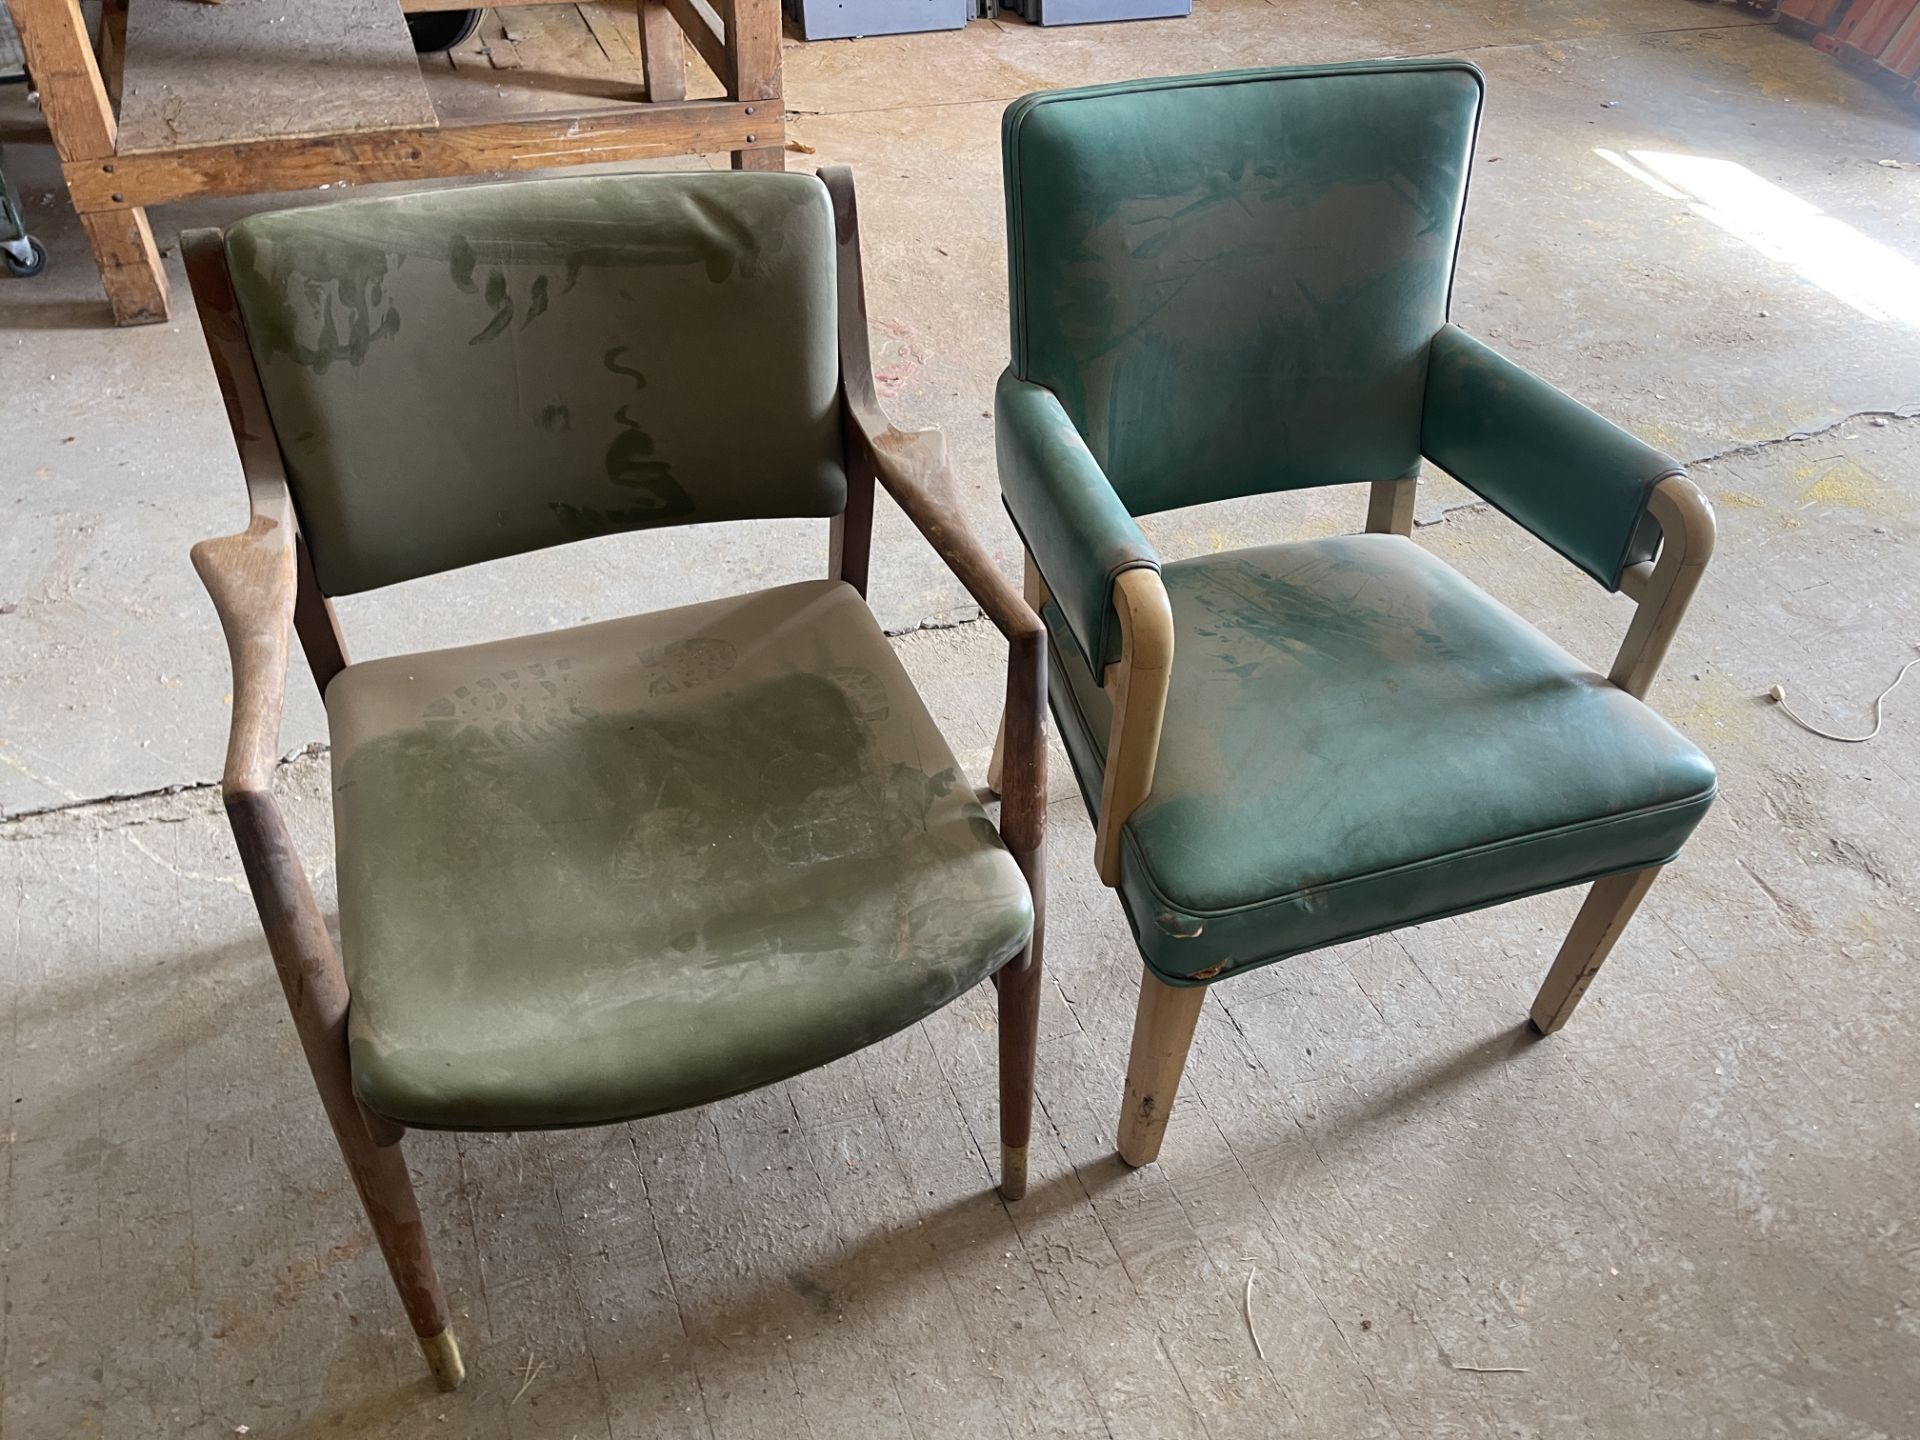 VINTAGE ART DECO CHAIRS , HIGHLY SEARCHED BY COLLECTORS